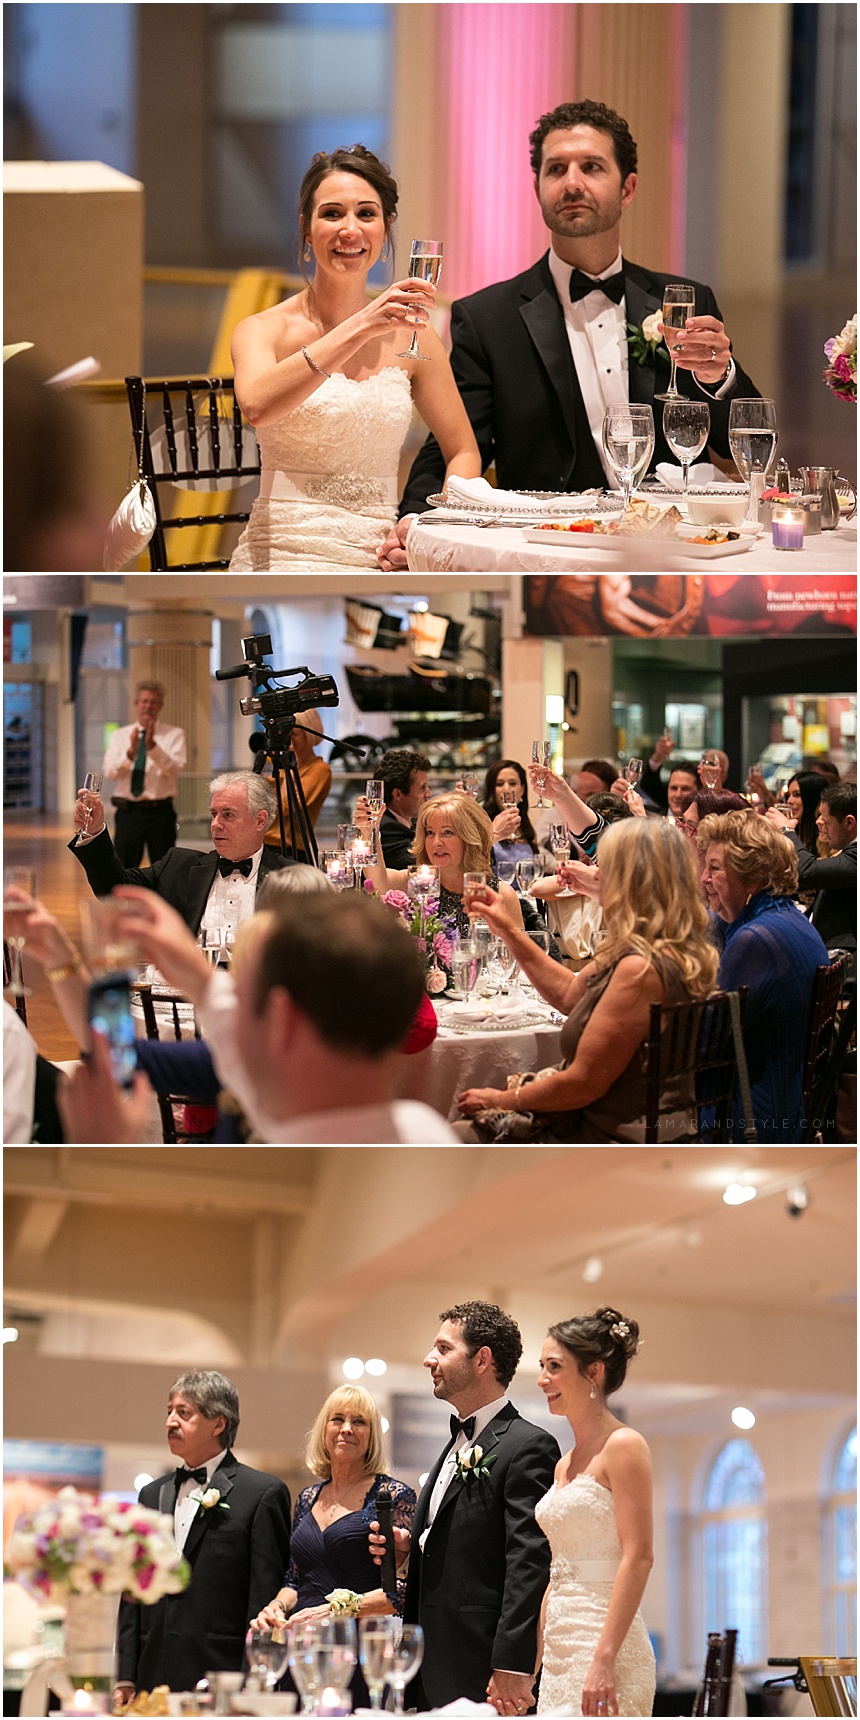 Wedding Toasts at the Henry Ford Museum